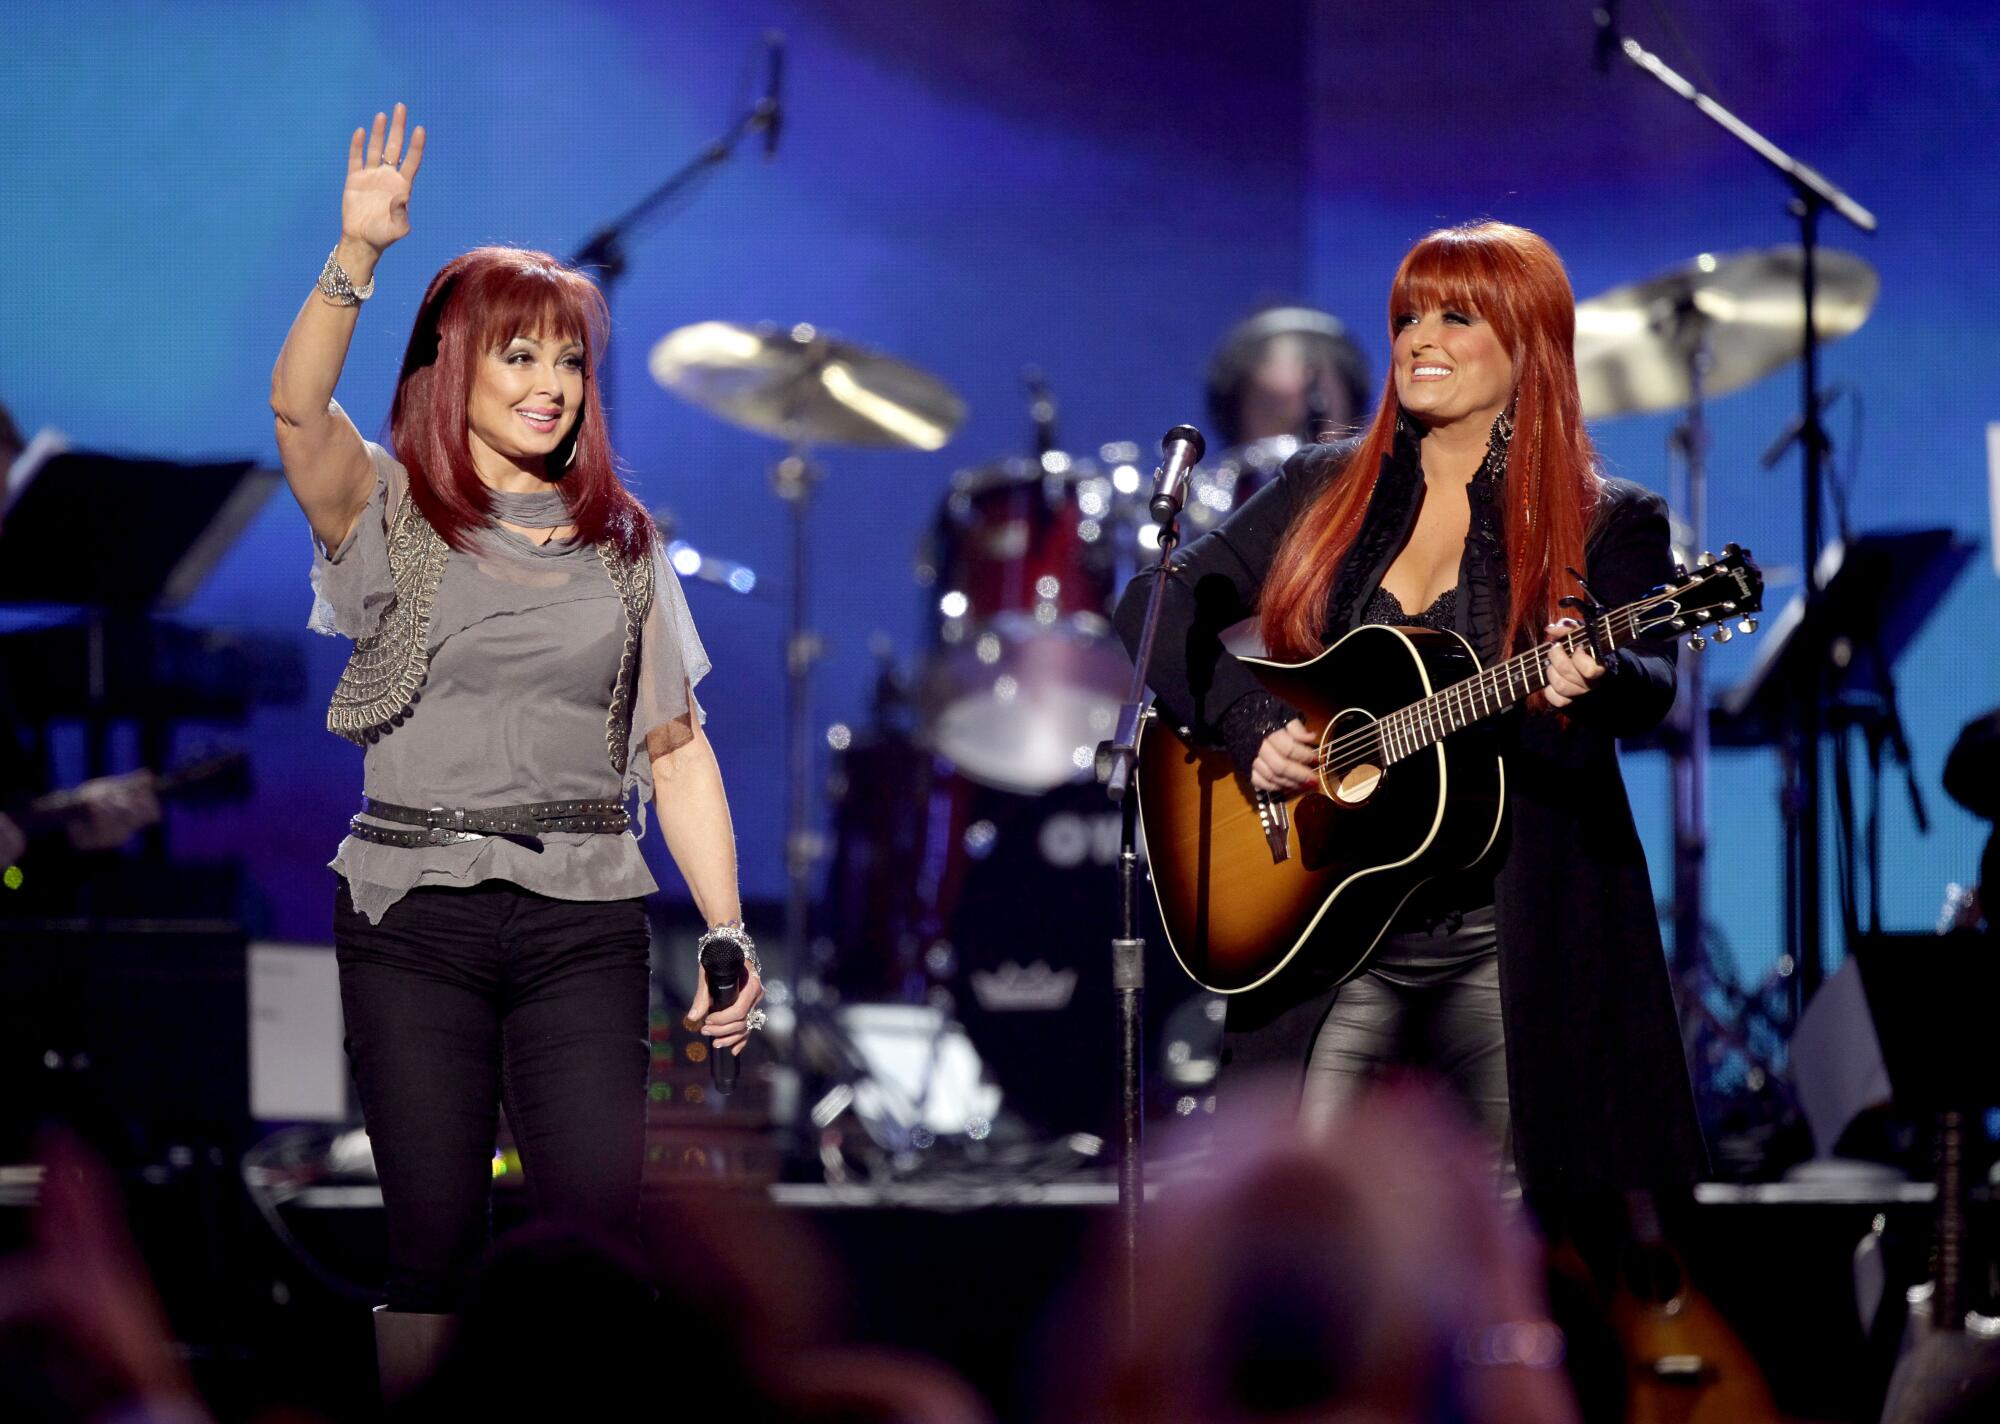 The Judds -- mother Naomi, left, and daughter Wynonna, right -- perform onstage together.